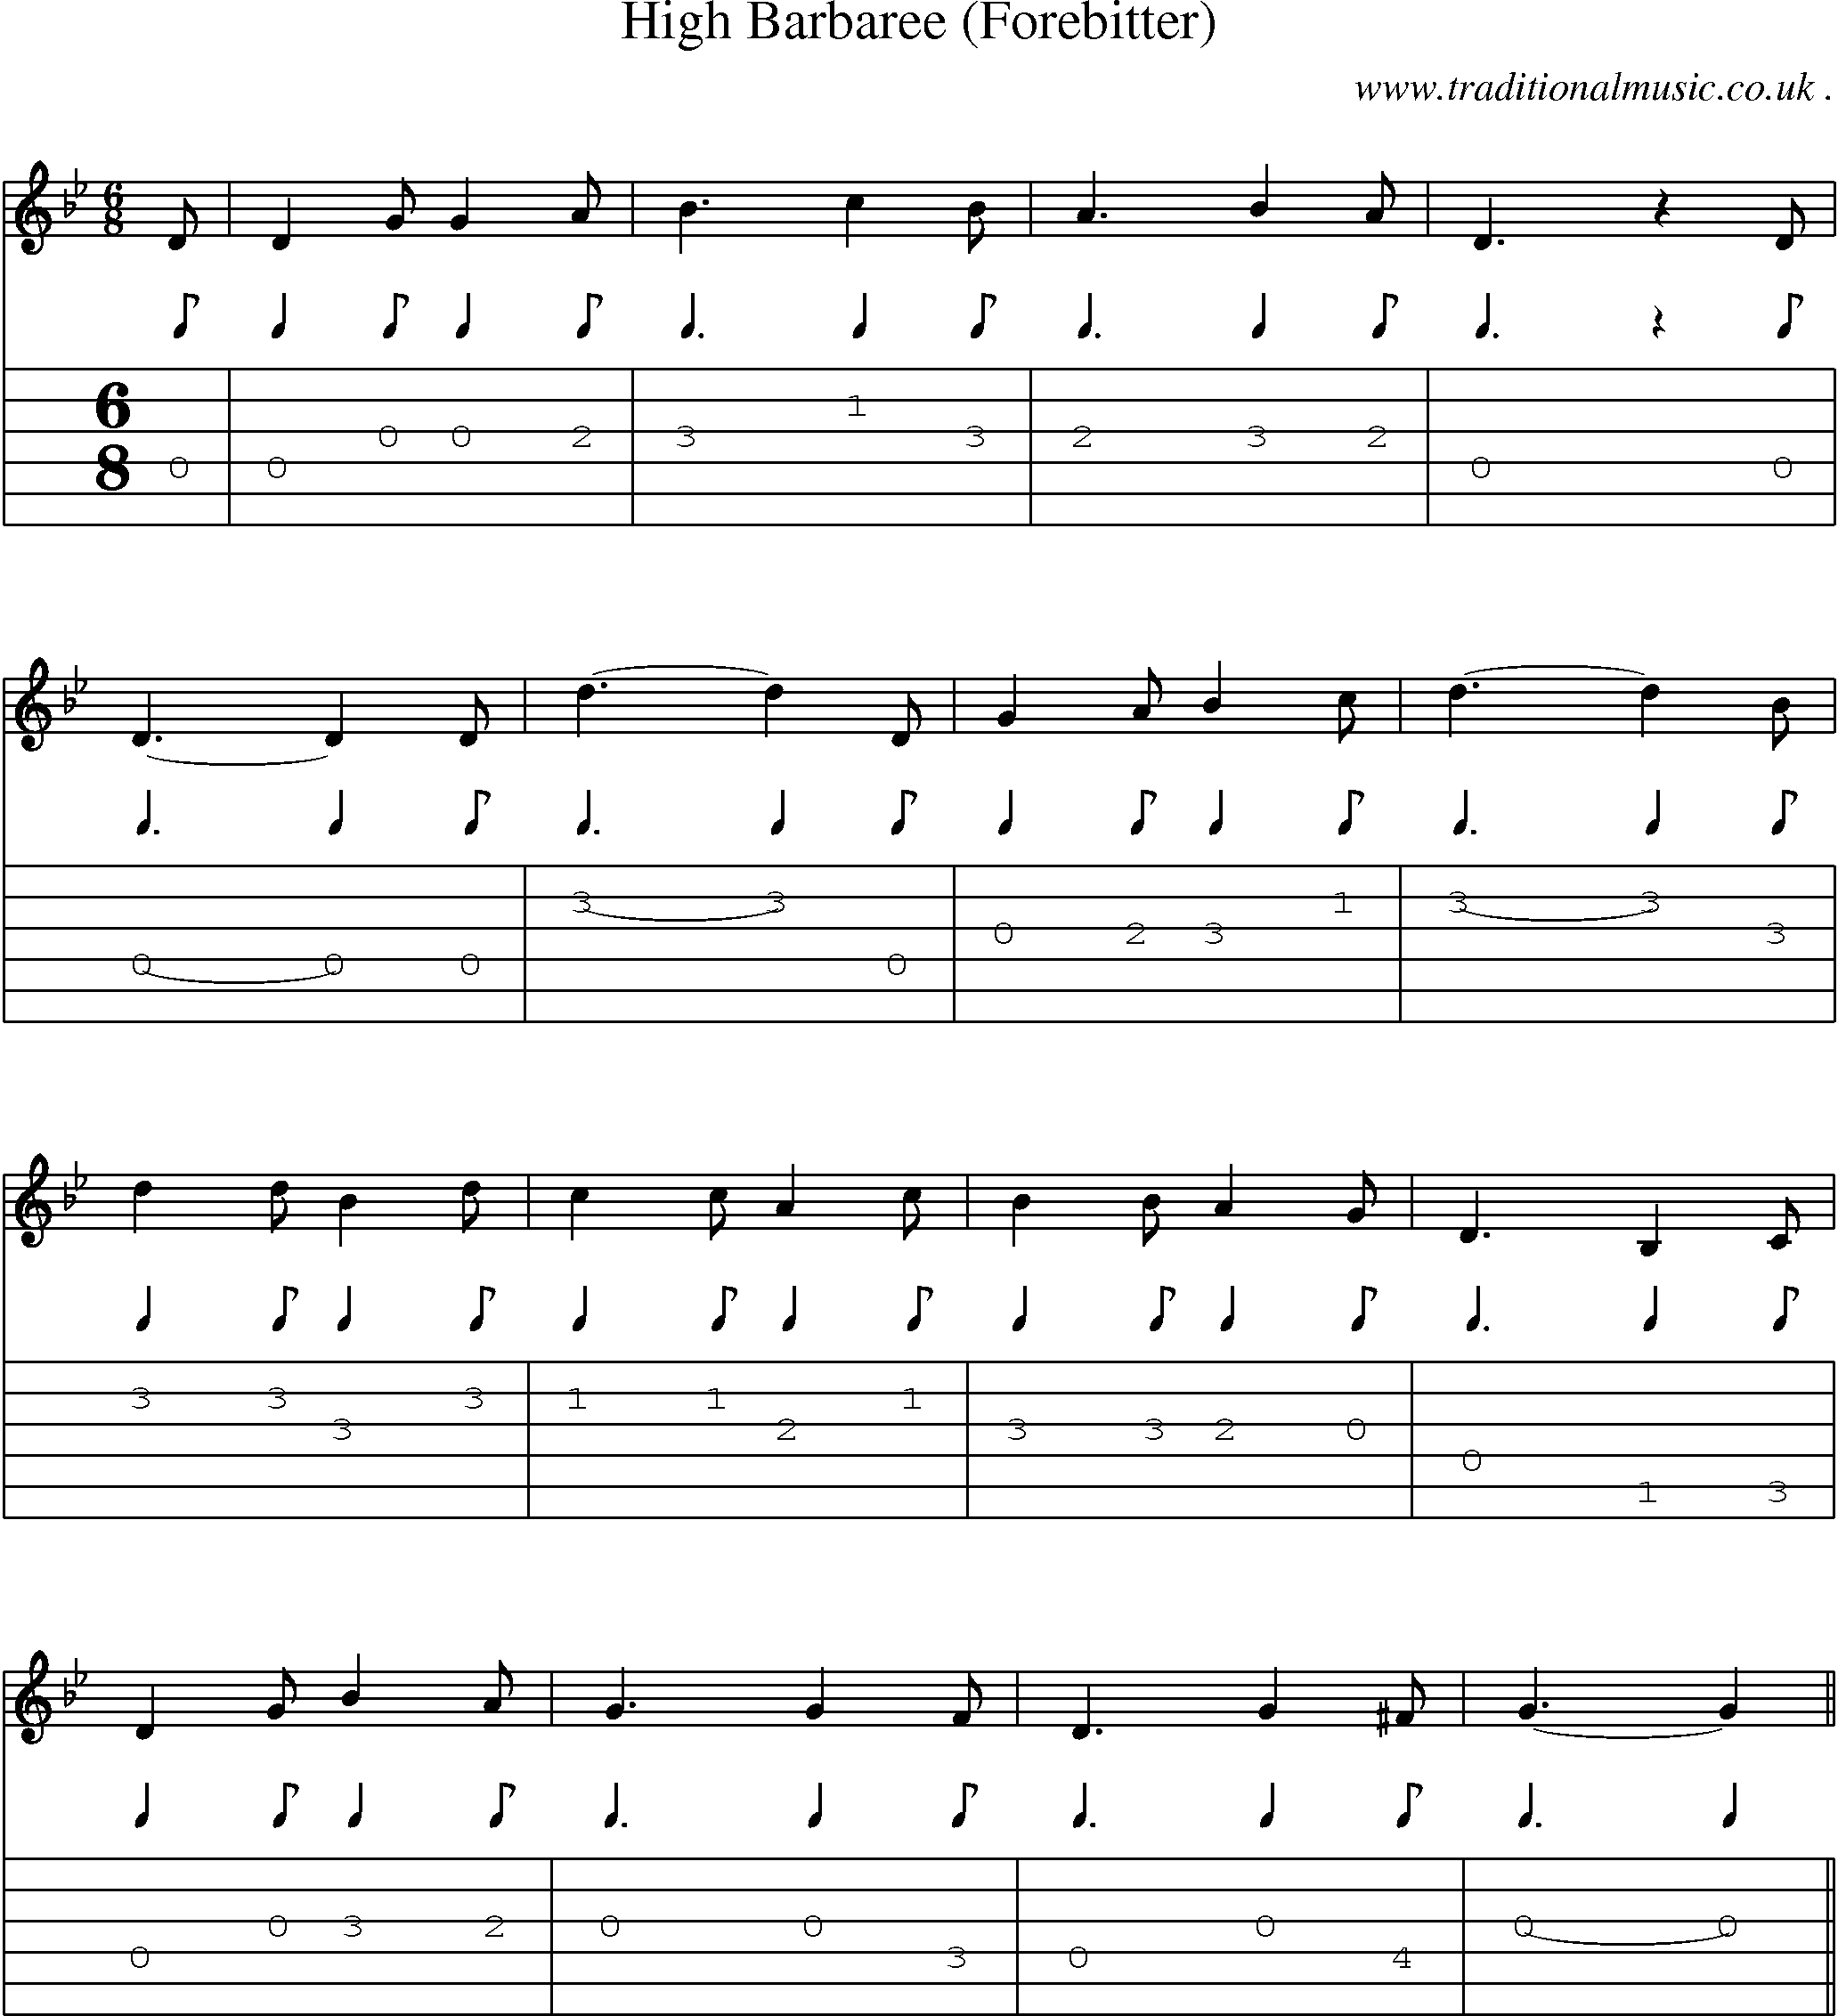 Sheet-Music and Guitar Tabs for High Barbaree (forebitter)